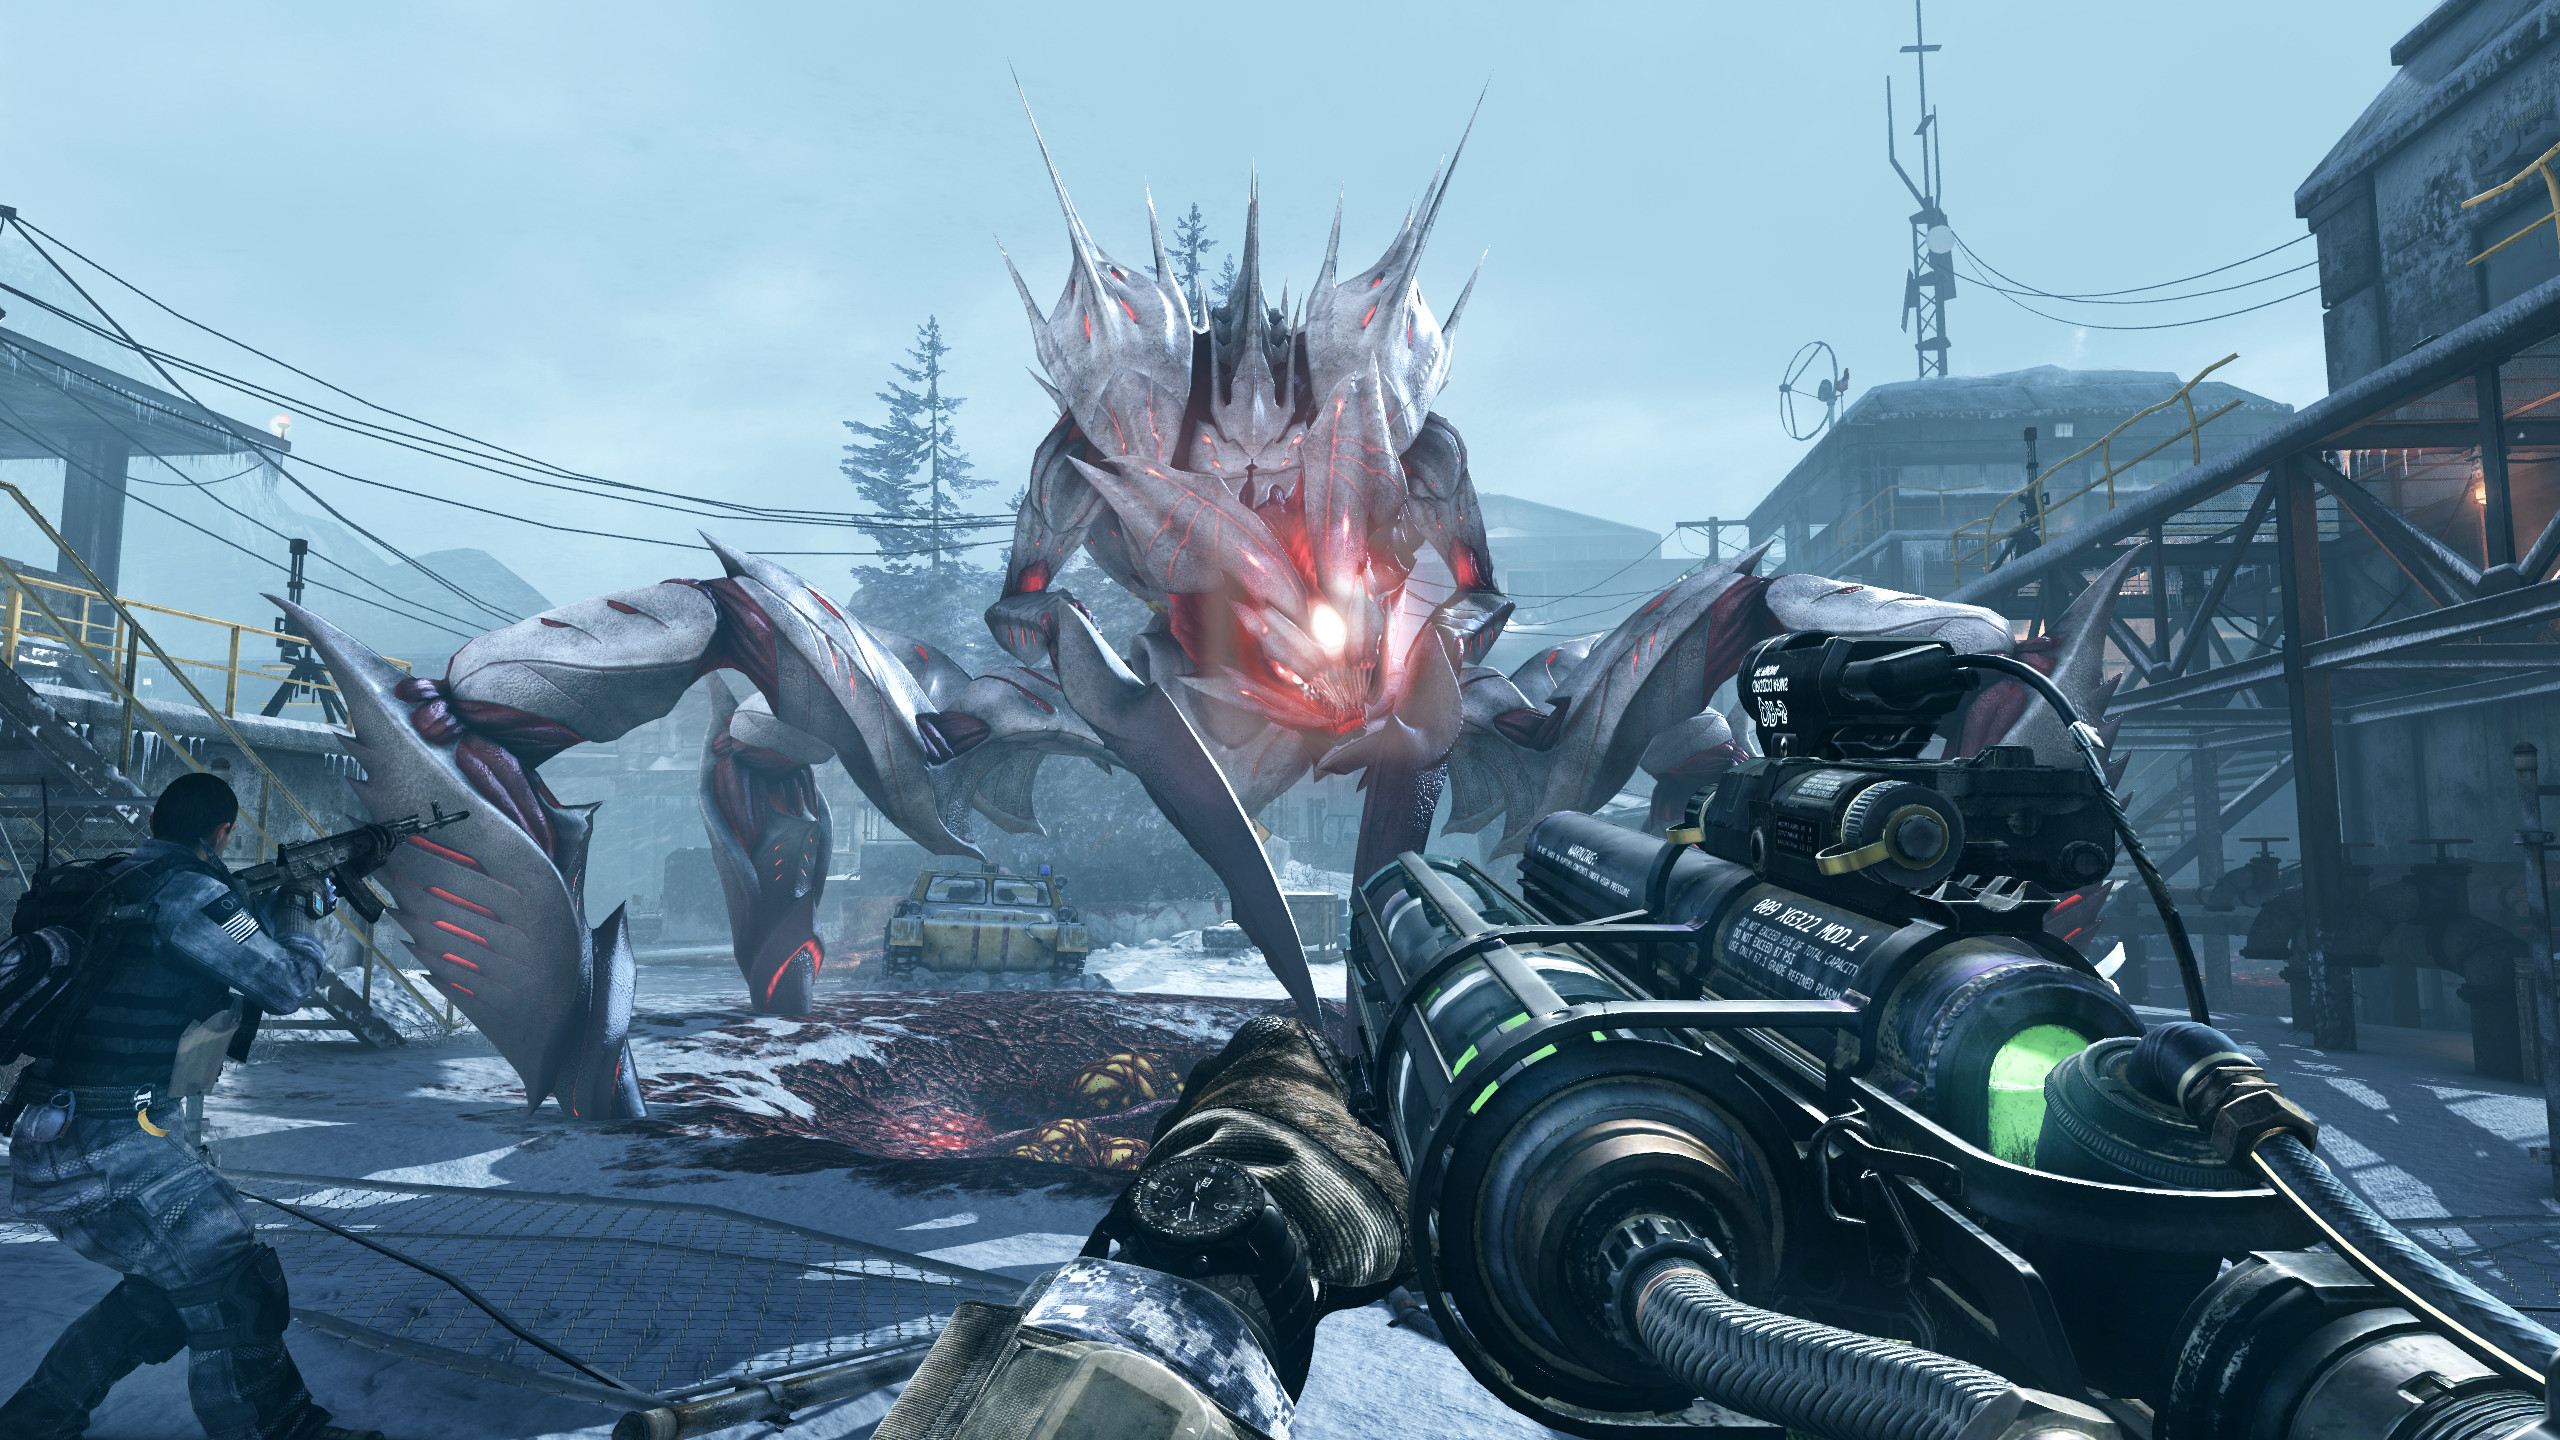 2560x1440 Exctinction Nightfall Breeder Battle. COD Ghosts Onslaught_Ignition  Environment